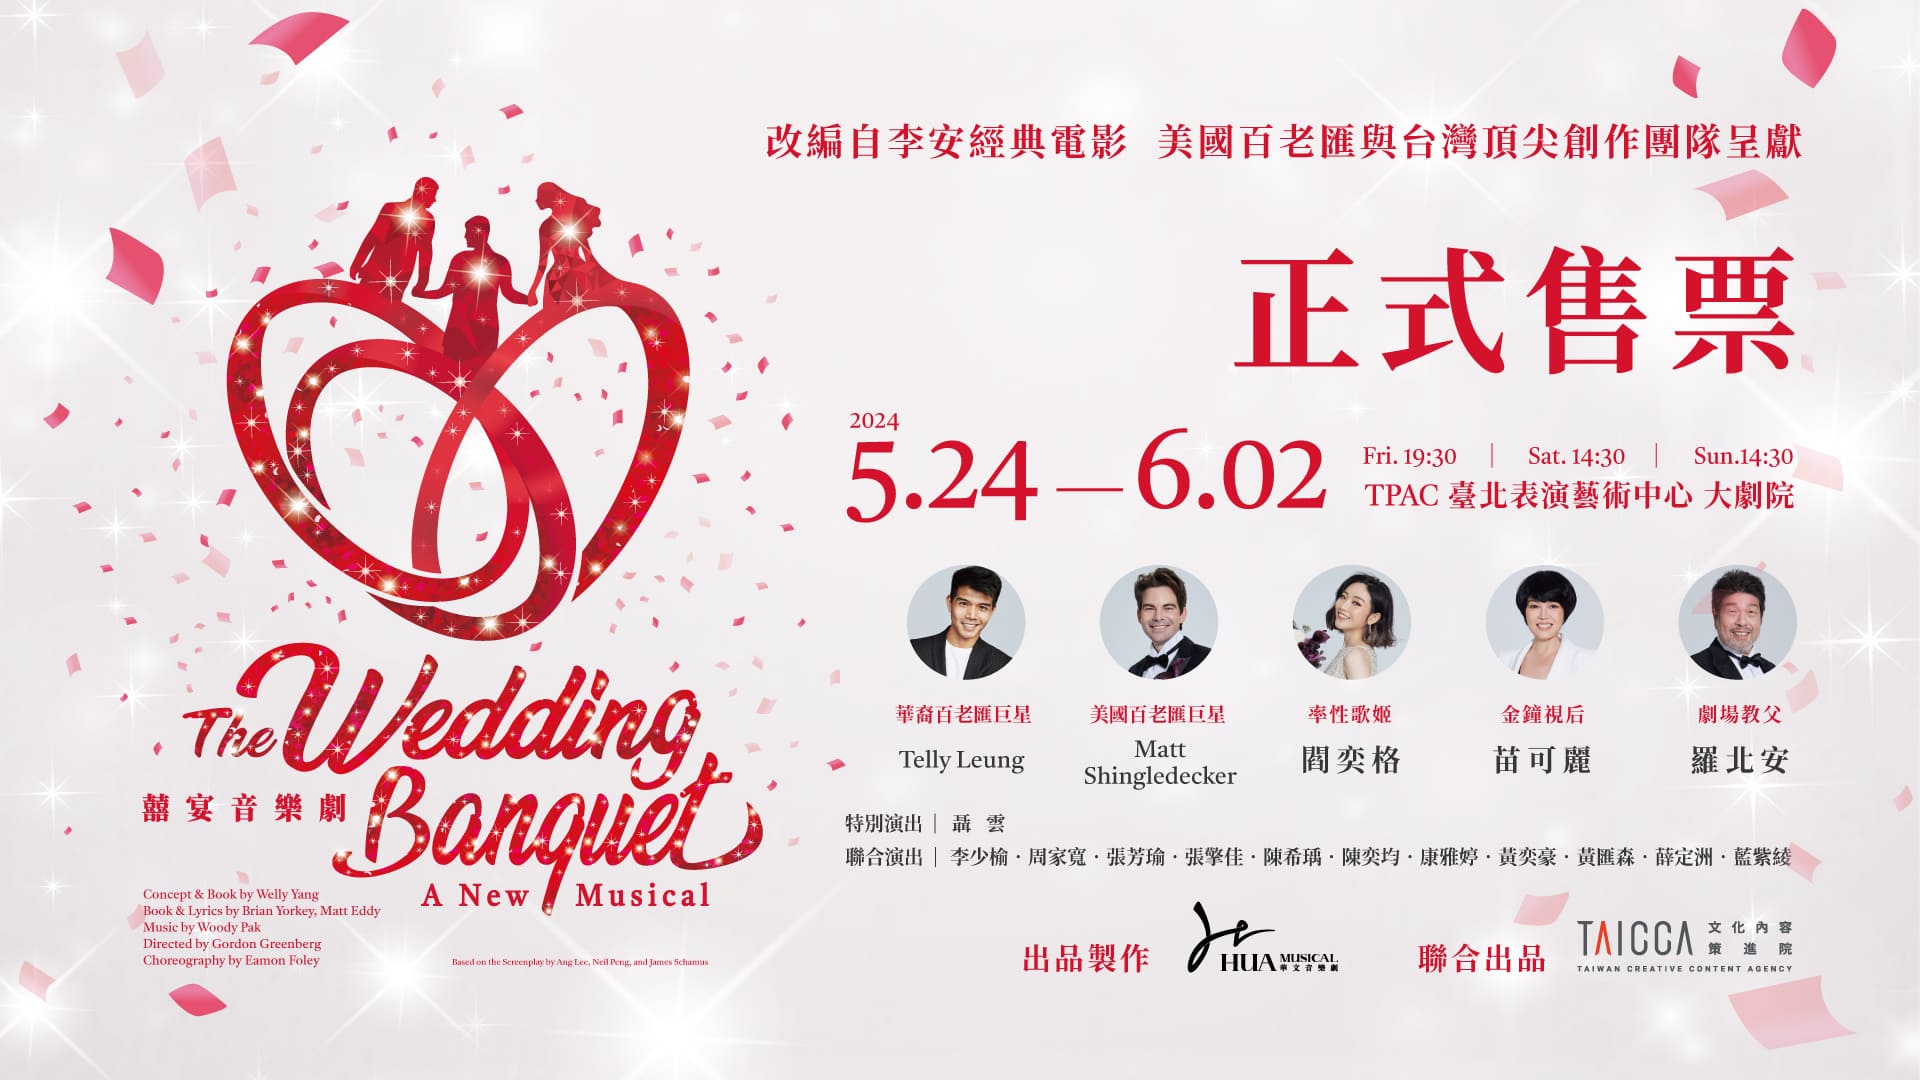 Musical ‘The Wedding Banquet’ featuring Broadway stars to premiere in Taipei 